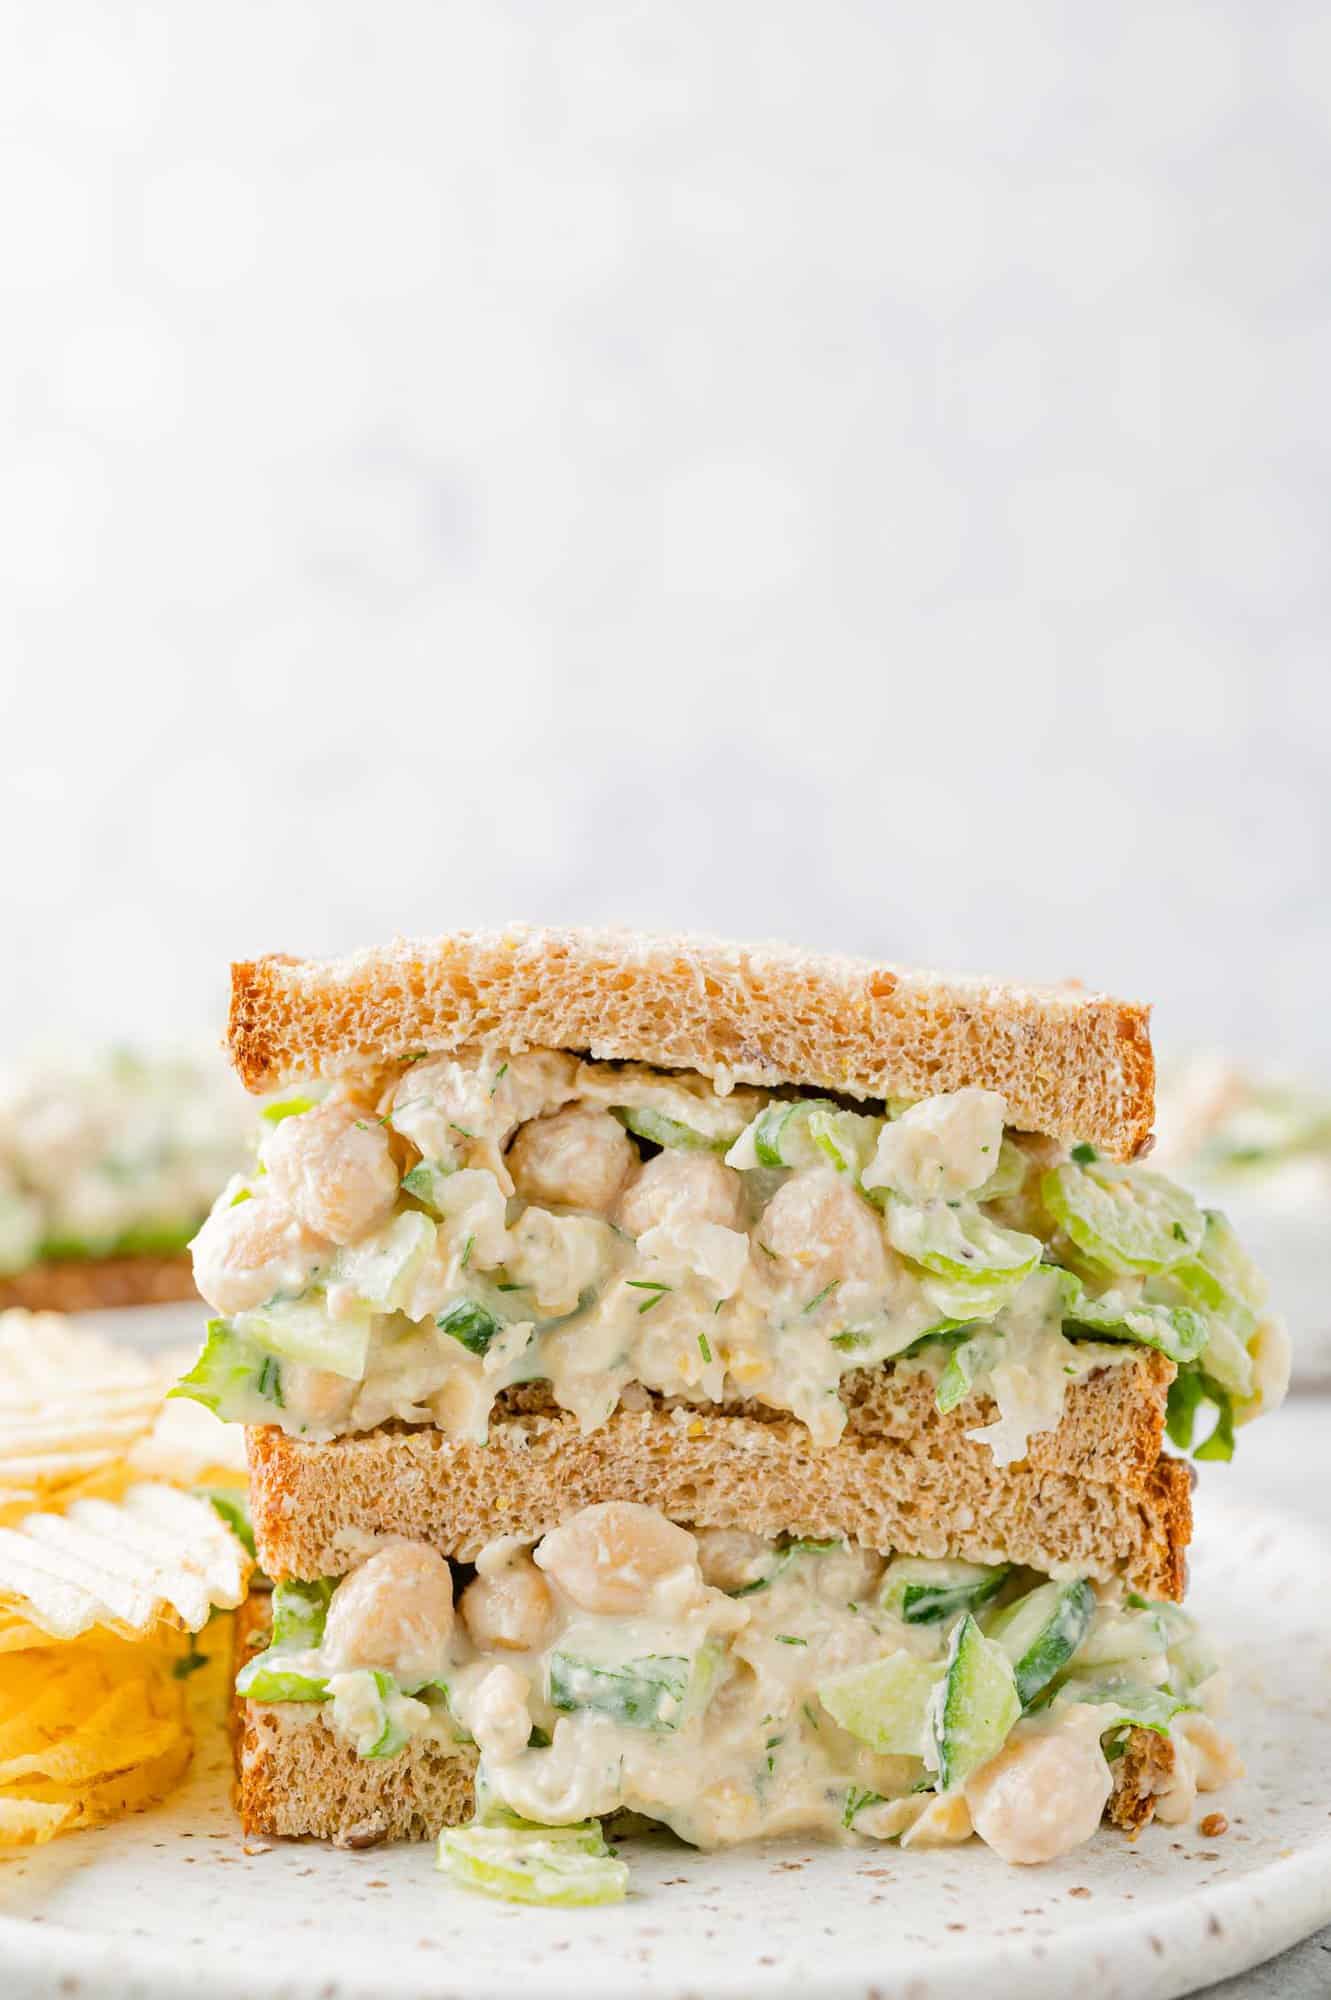 Two halves of a chickpea salad sandwich, stacked up.